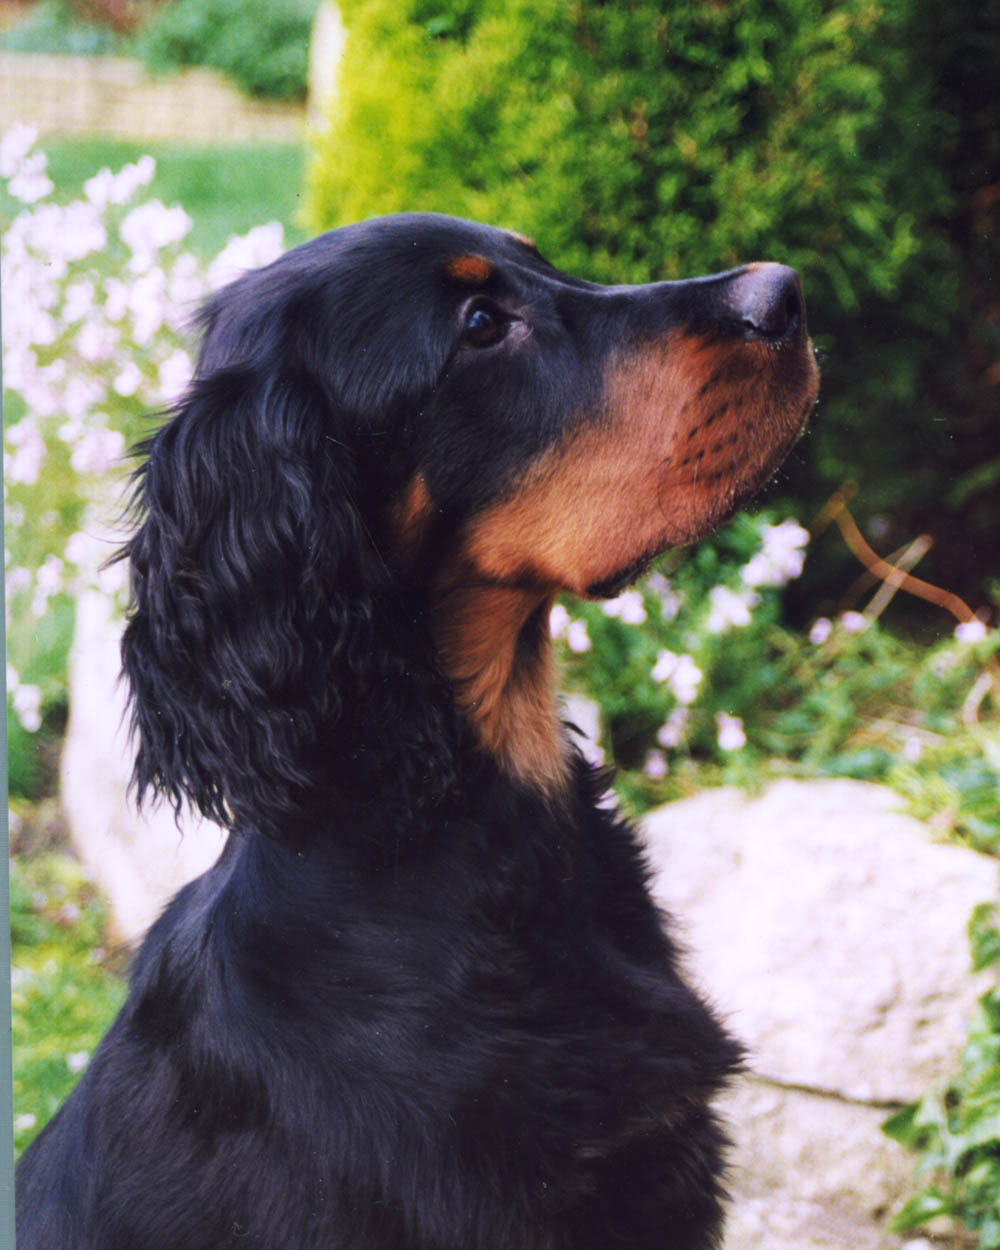 All sizes | Young Gordon Setter | Flickr - Photo Sharing!